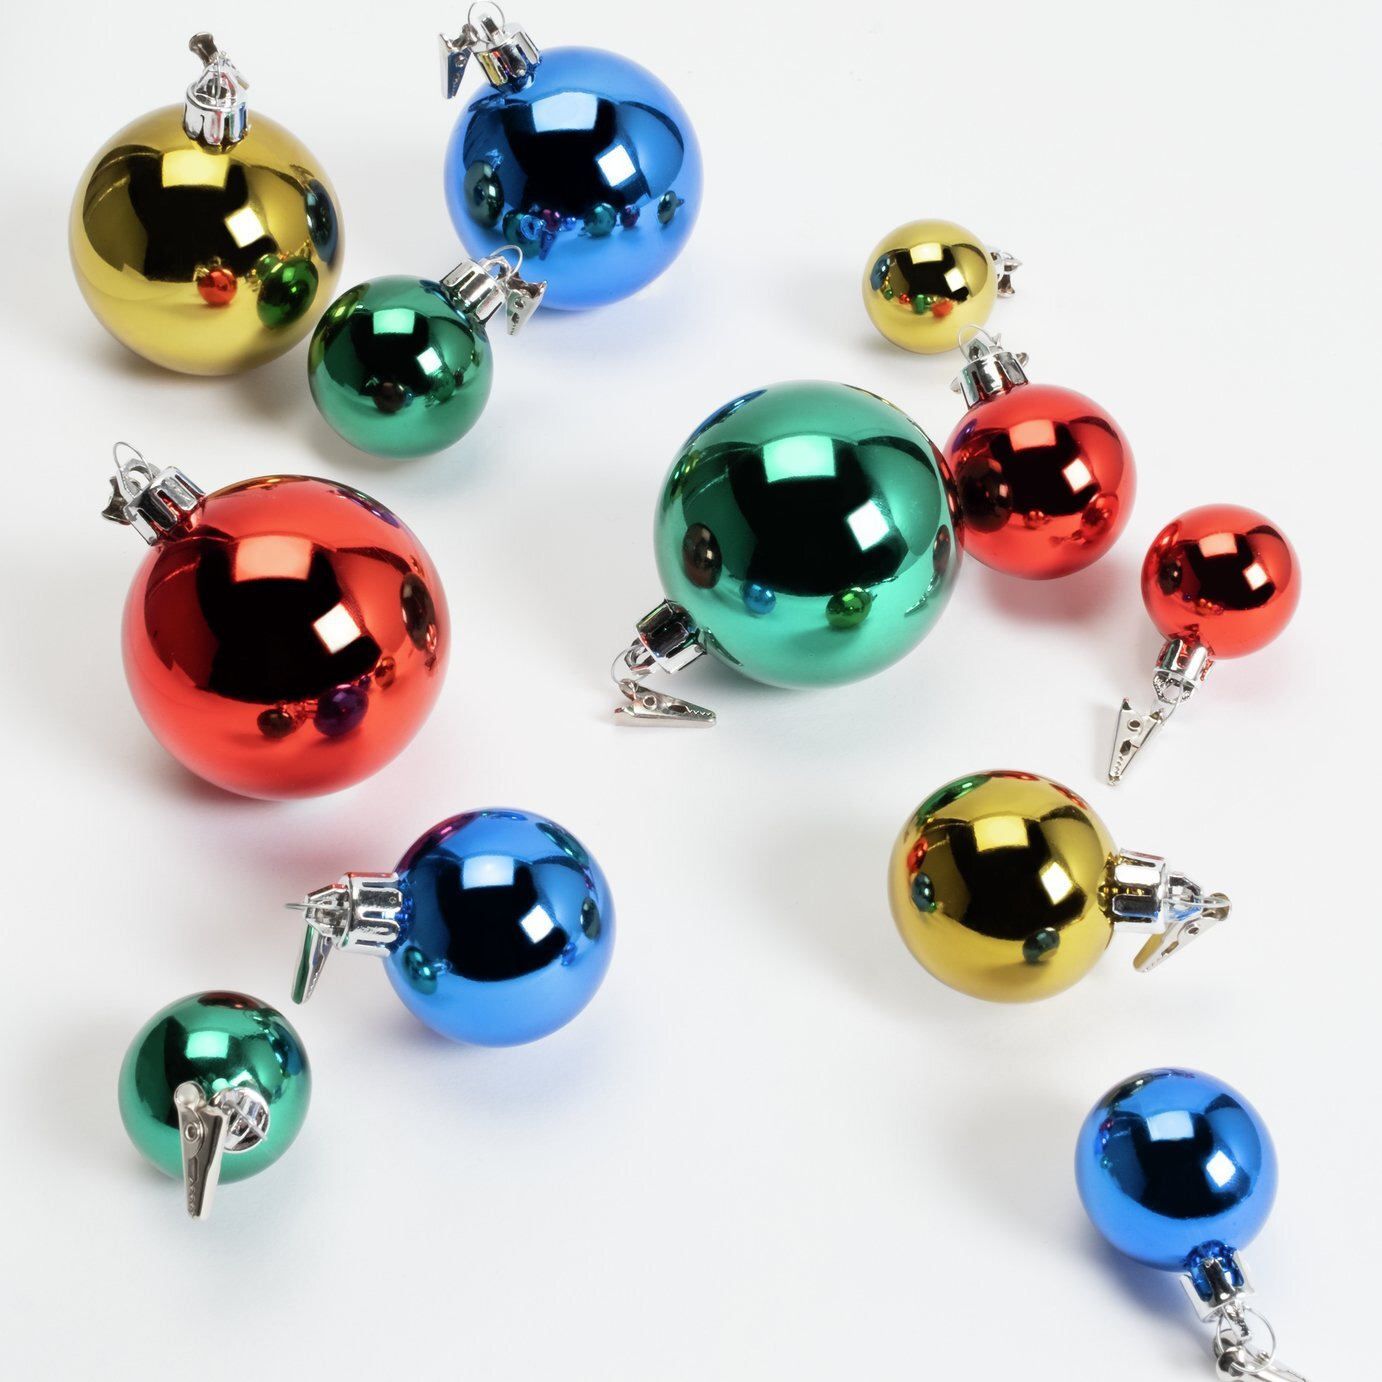 Habitat Pack of 12 Clip on Christmas Baubles - Multicoloured - image 1